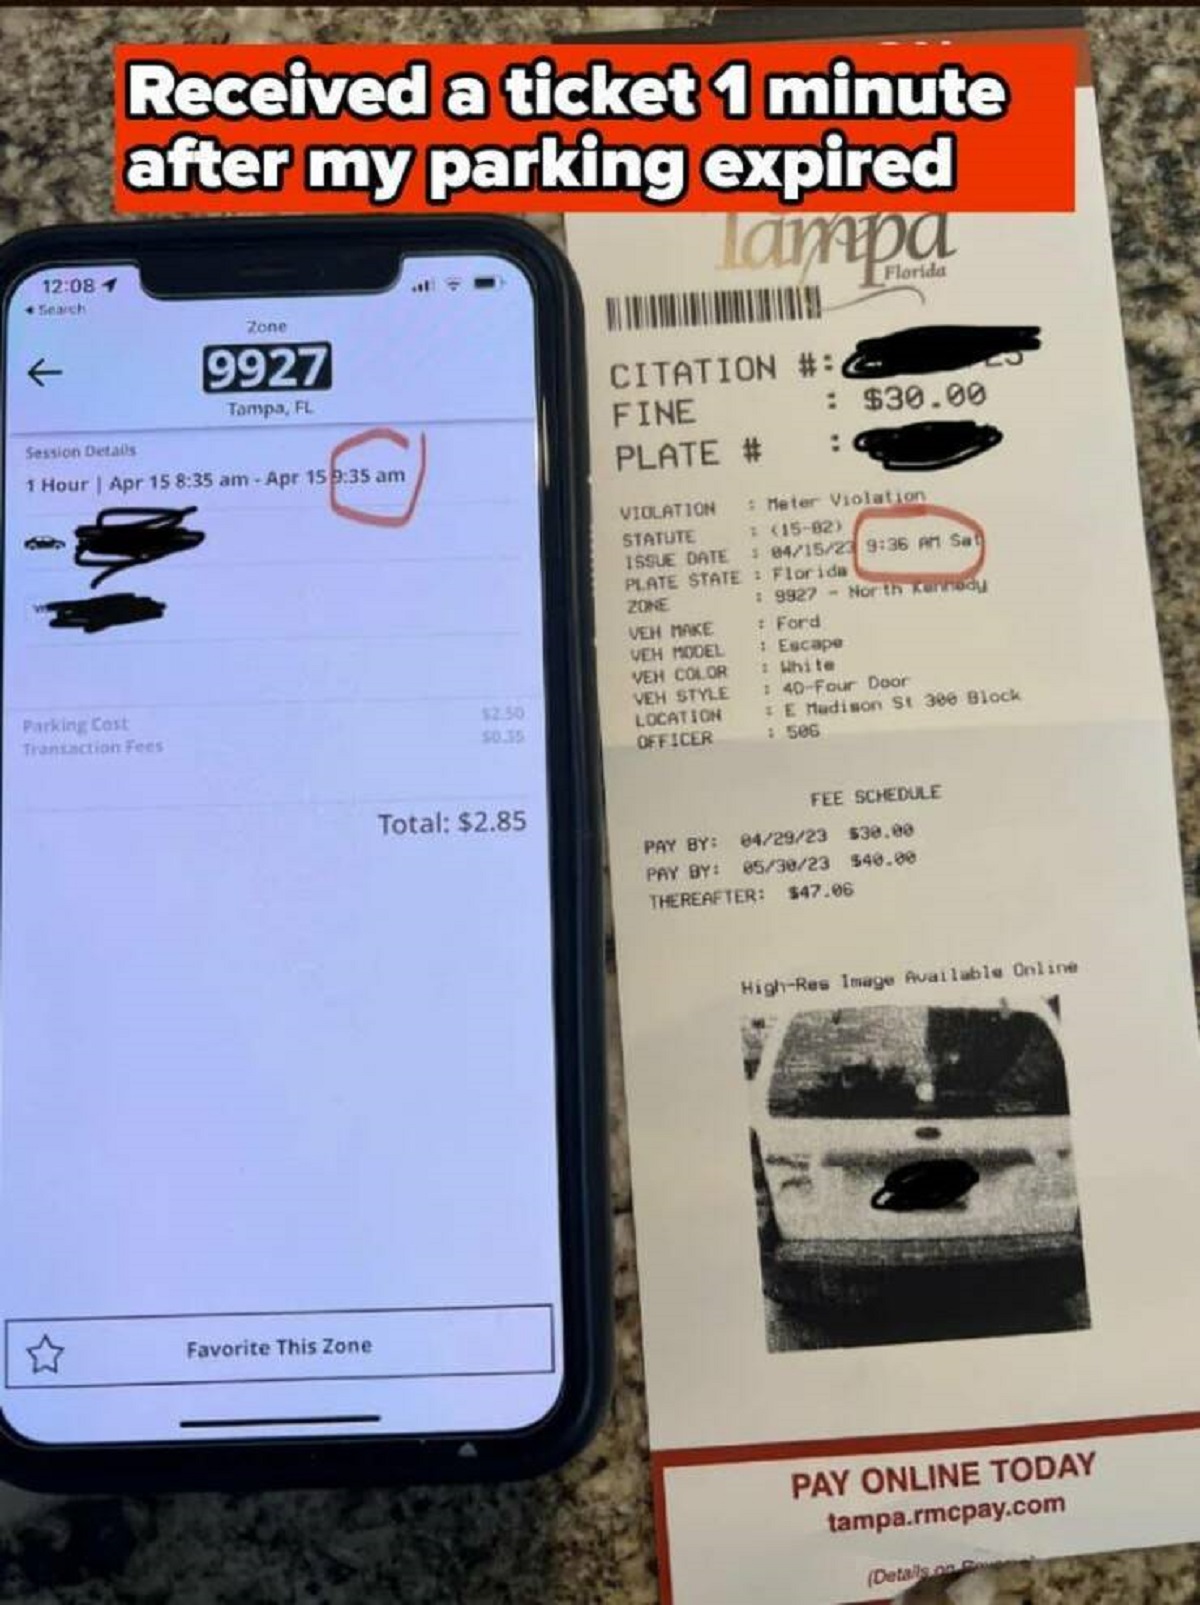 iphone - 1 Search Session Details Received a ticket 1 minute after my parking expired Zone 9927 Tampa, Fl 1 Hour | Apr 15 Apr Parking Cost Transaction Fees Tampa Citation # Fine Plate # Violation Statute Issue Date Florida $30.00 Meter Violation 1582 0415